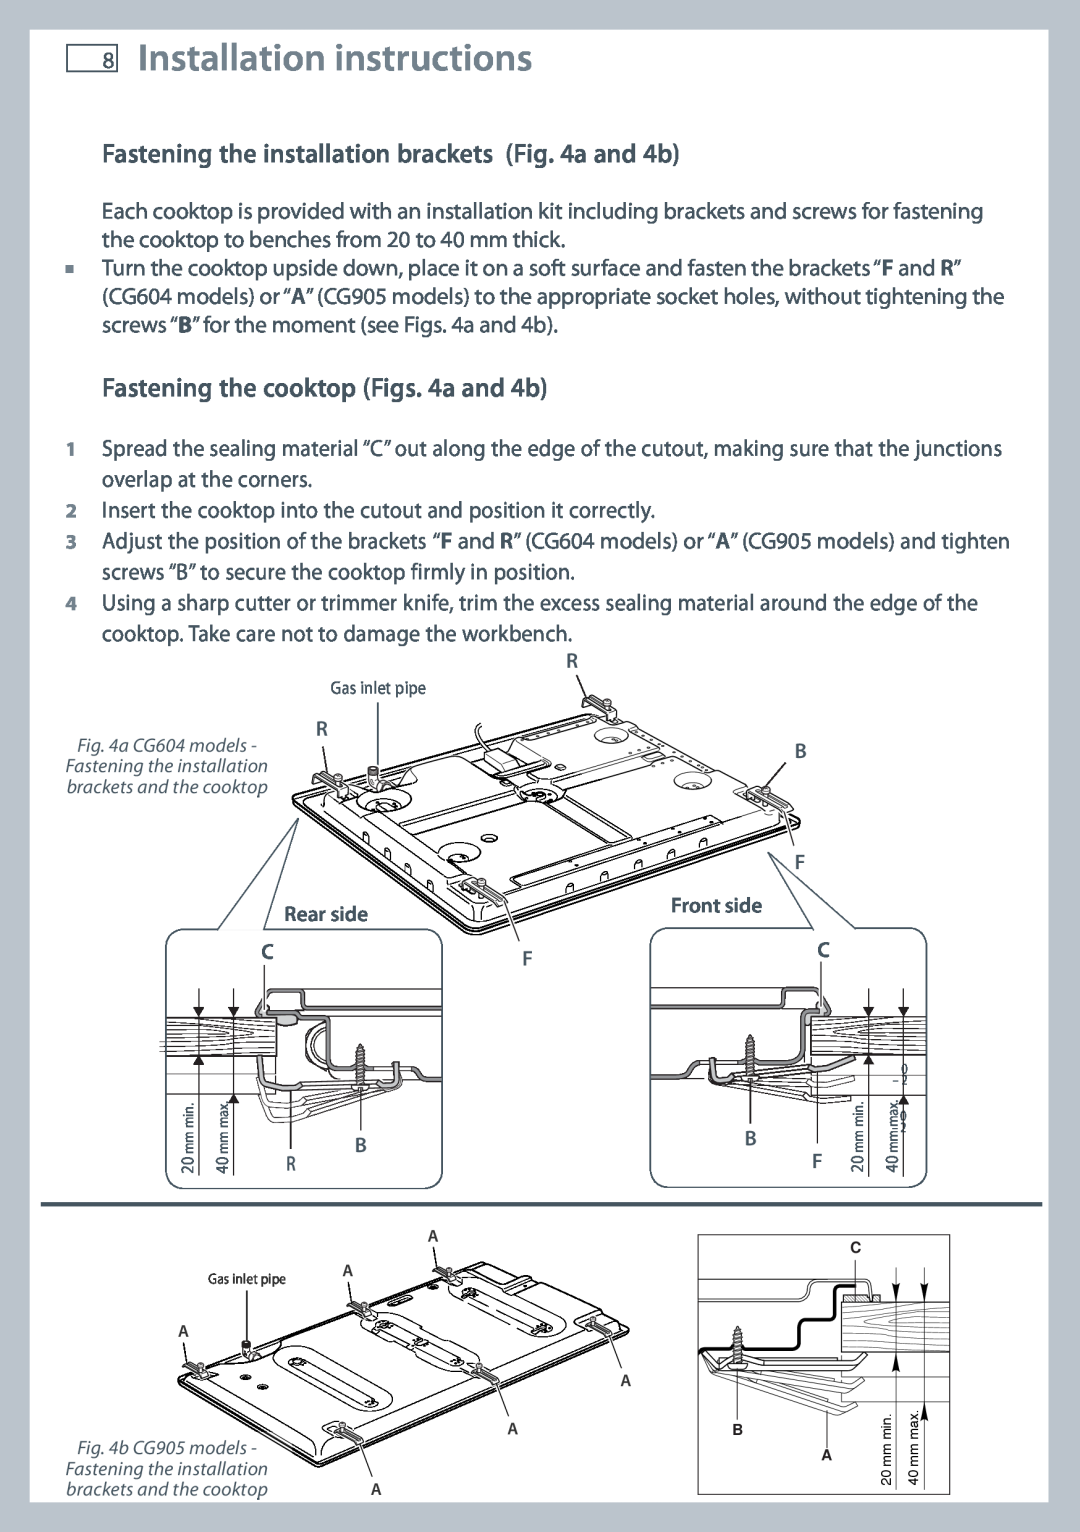 Fisher & Paykel CG604, CG905 installation instructions Fastening the cooktop Figs. 4a and 4b, Installation instructions 